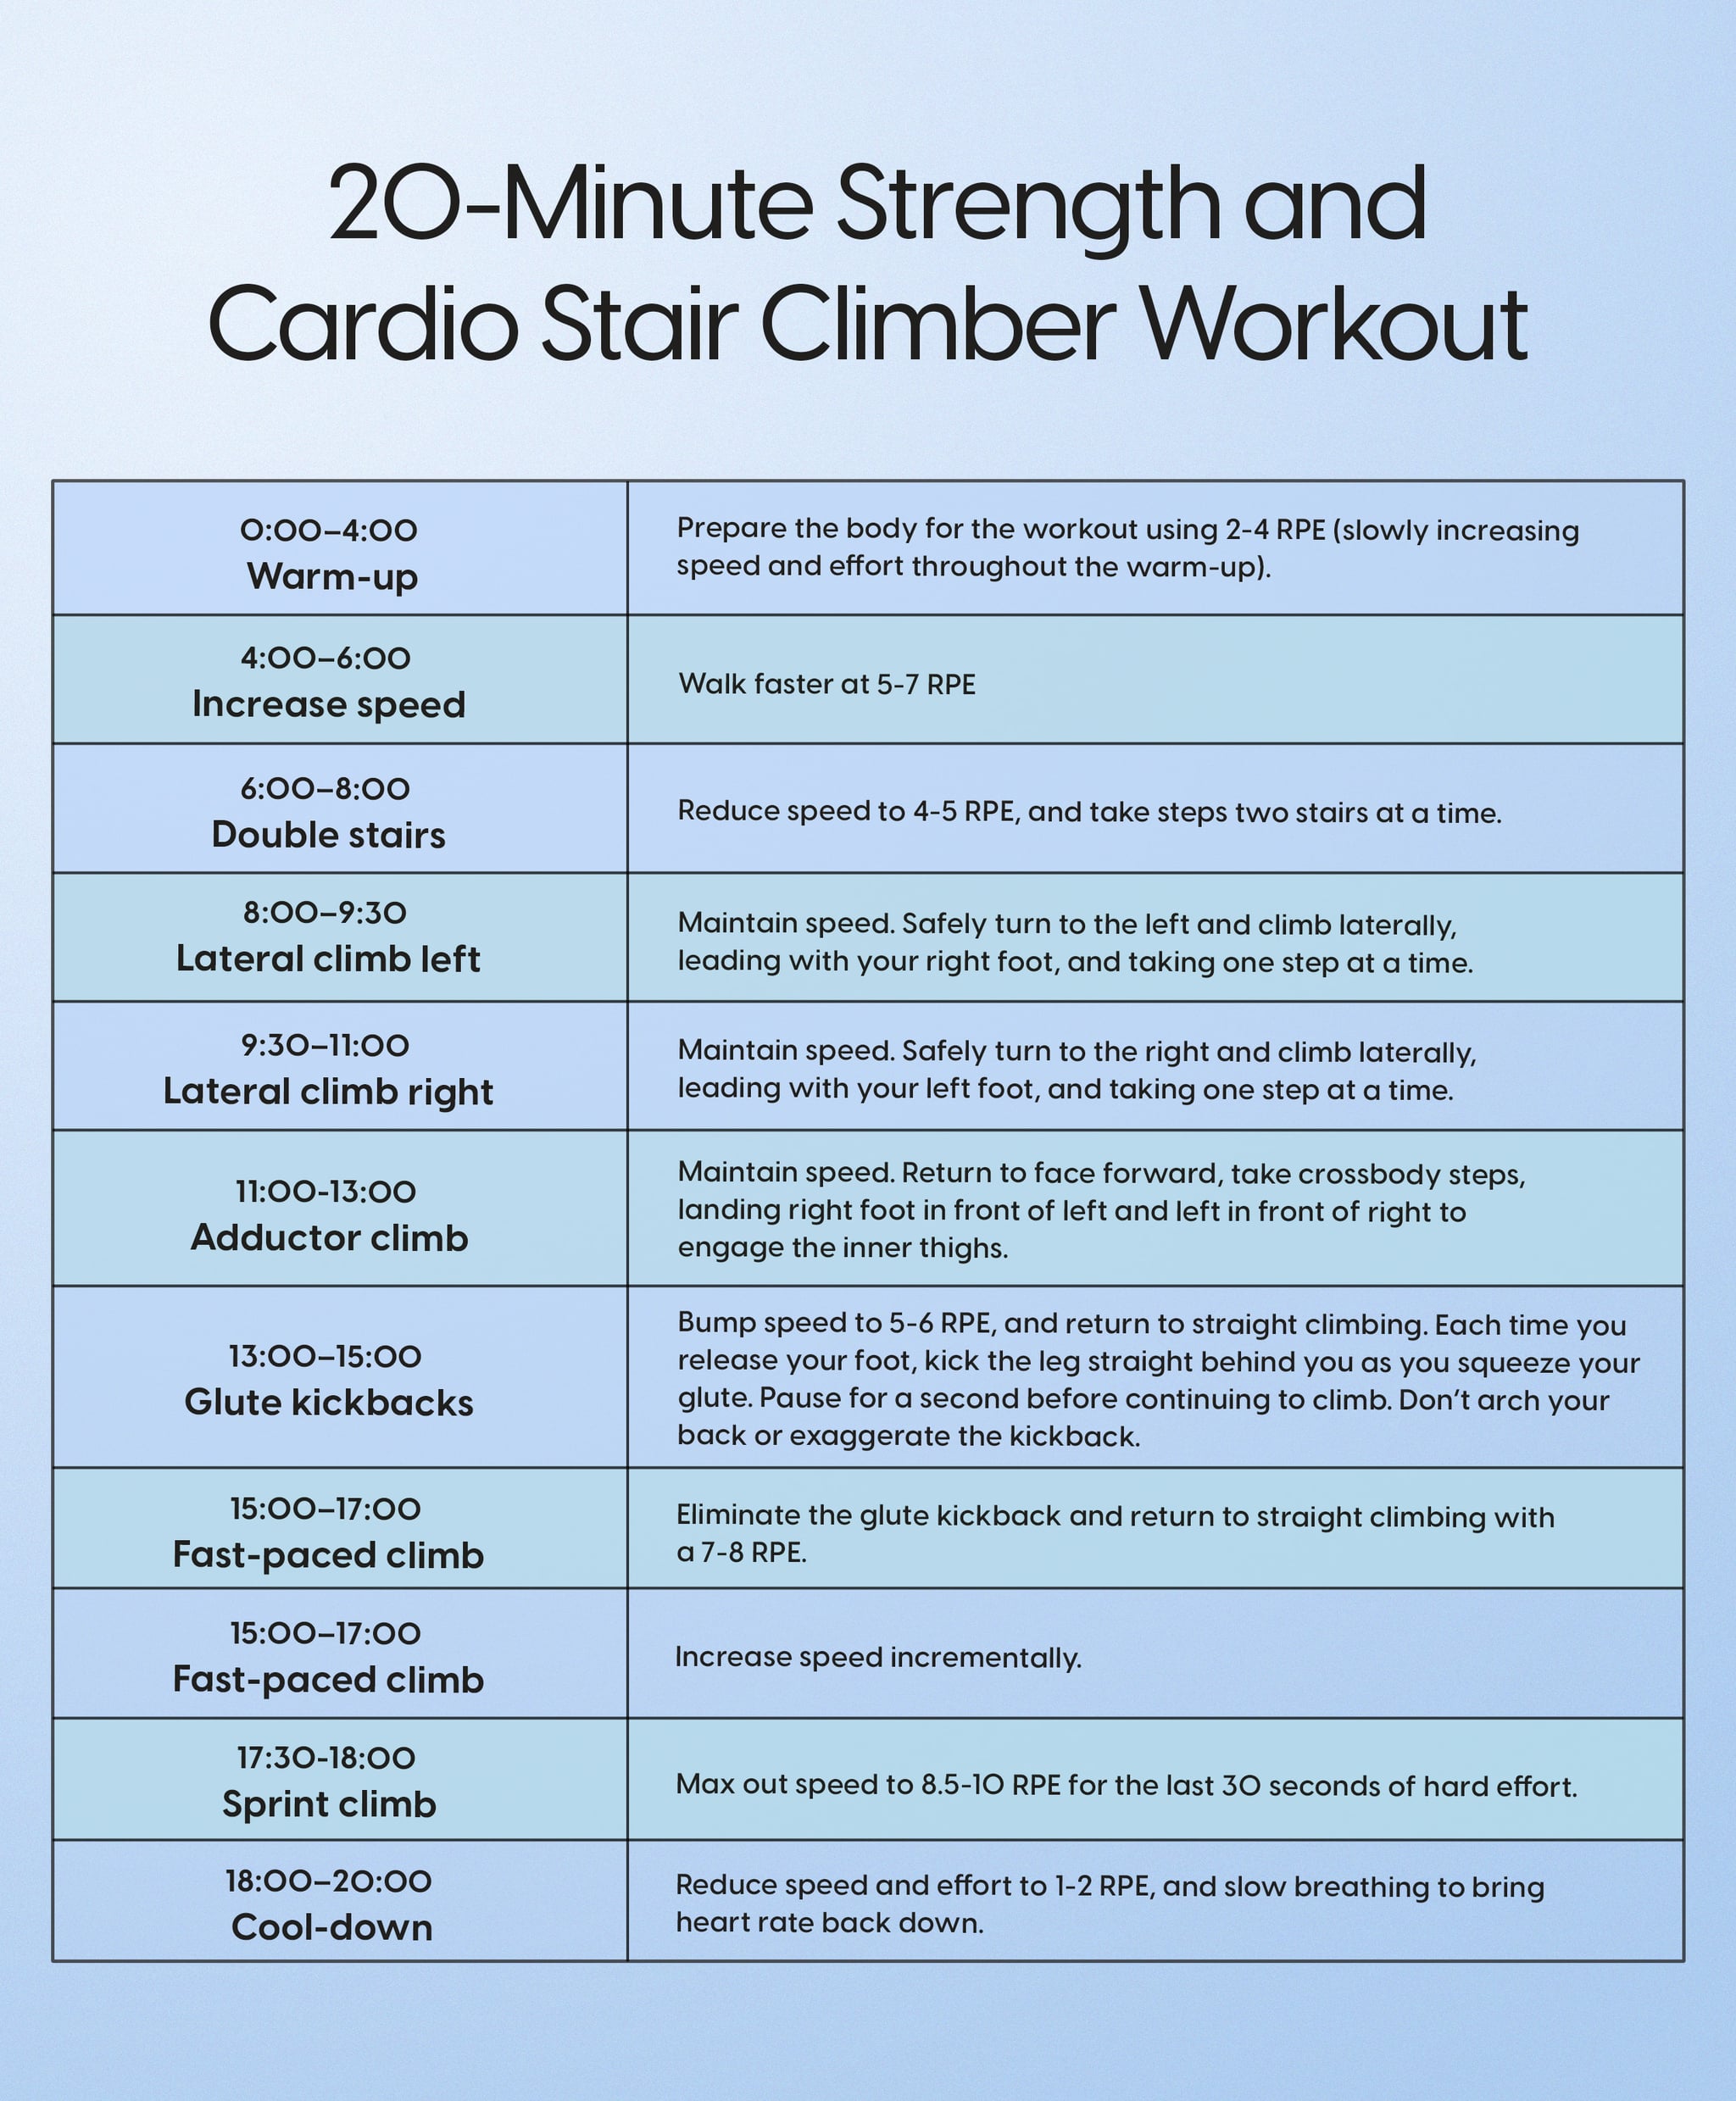 a 20-minute stair climber workout to help you break your cardio equipment rut